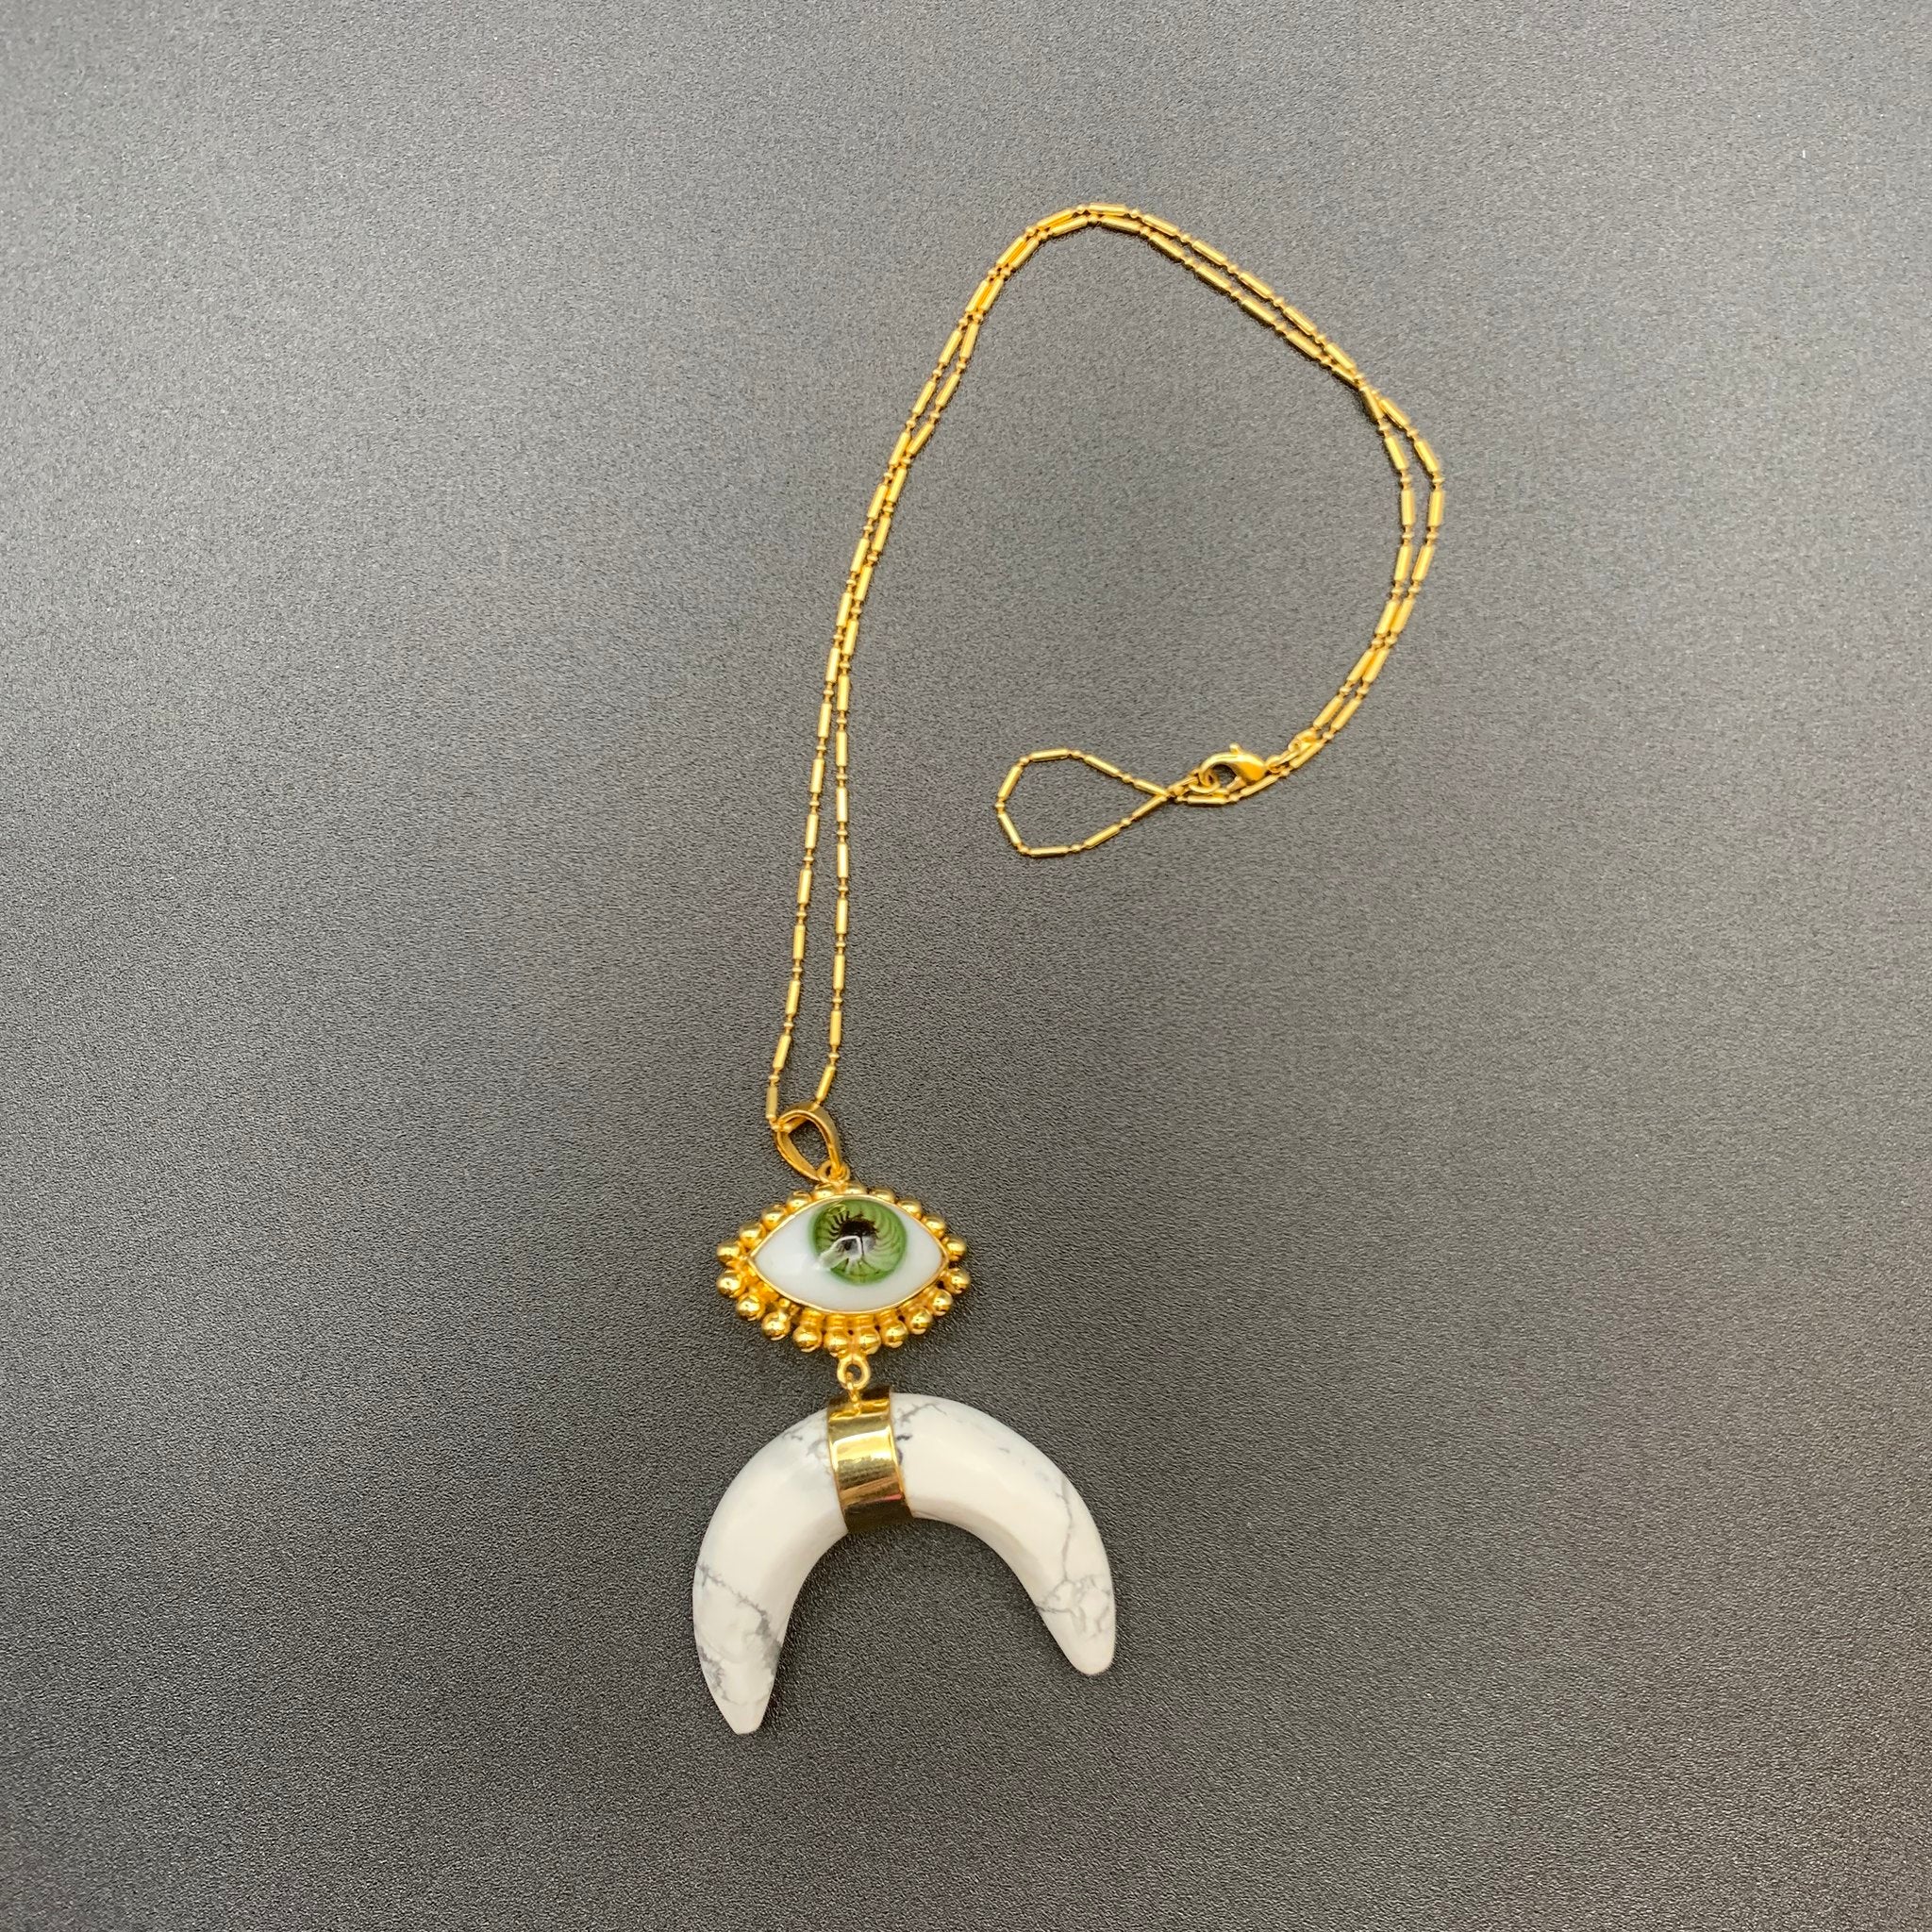 Talia Lanz - Eye Pendant with Spheres and Howlite Horn